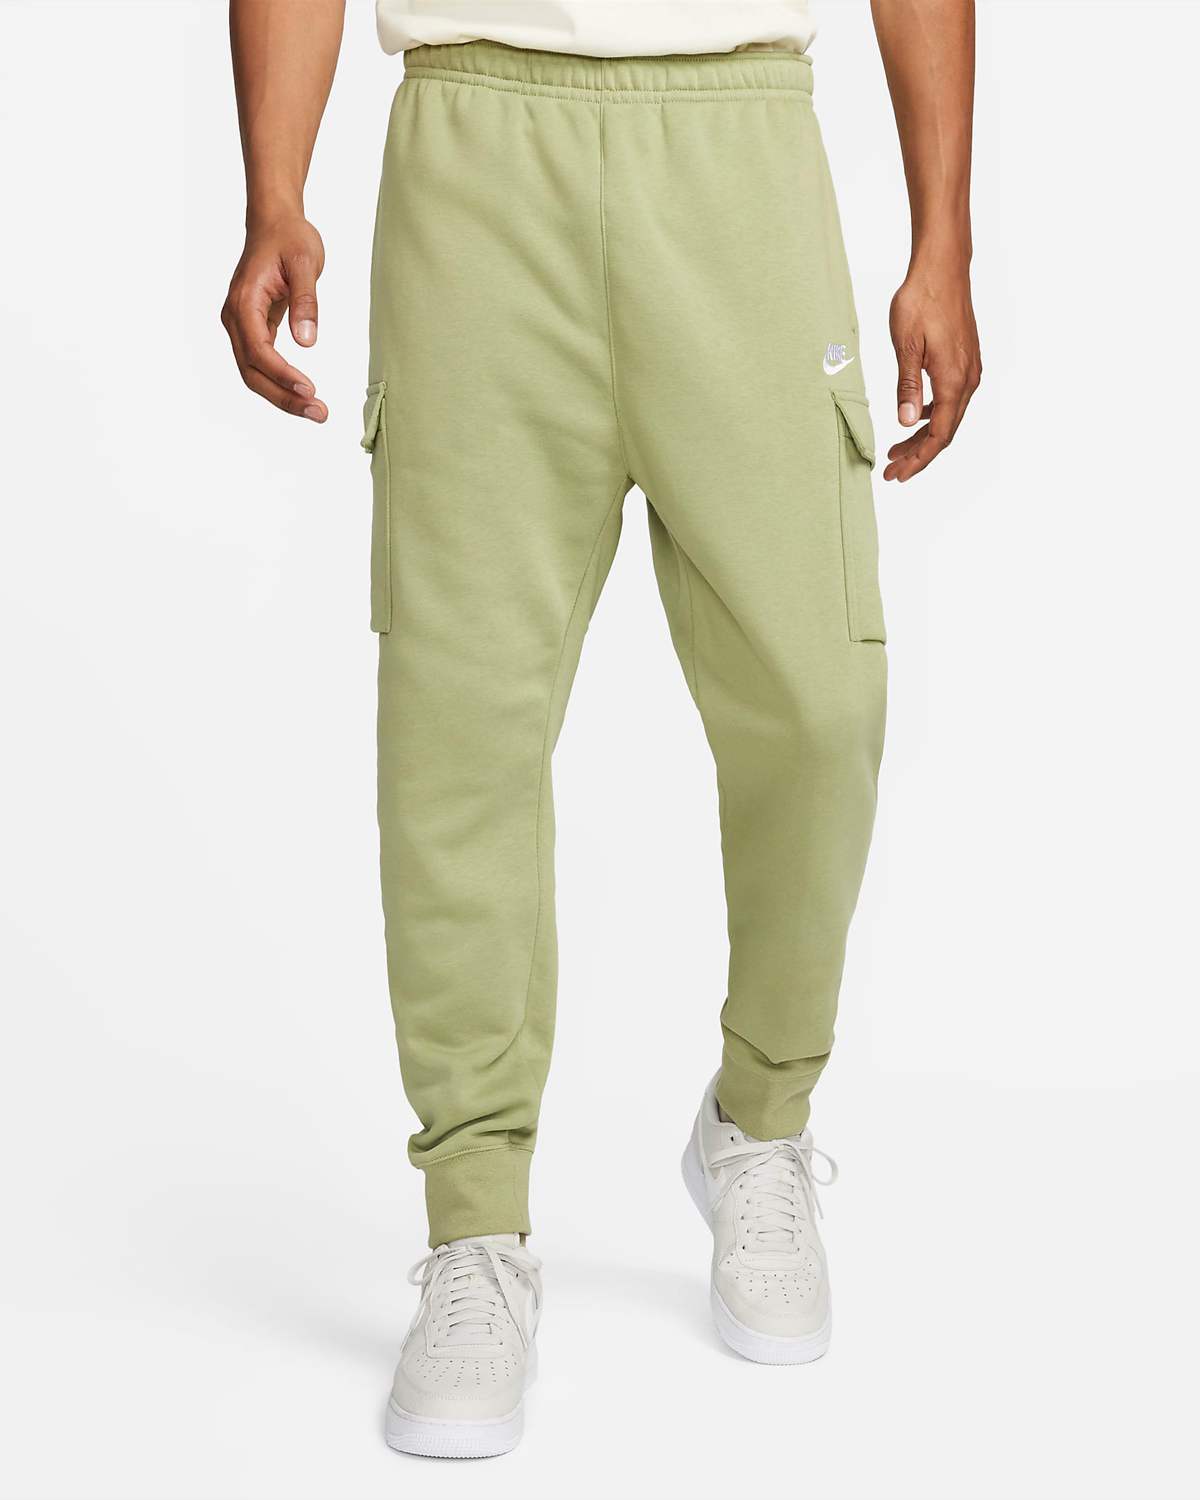 Nike Alligator Green Shirts Clothing and Sneaker Outfits